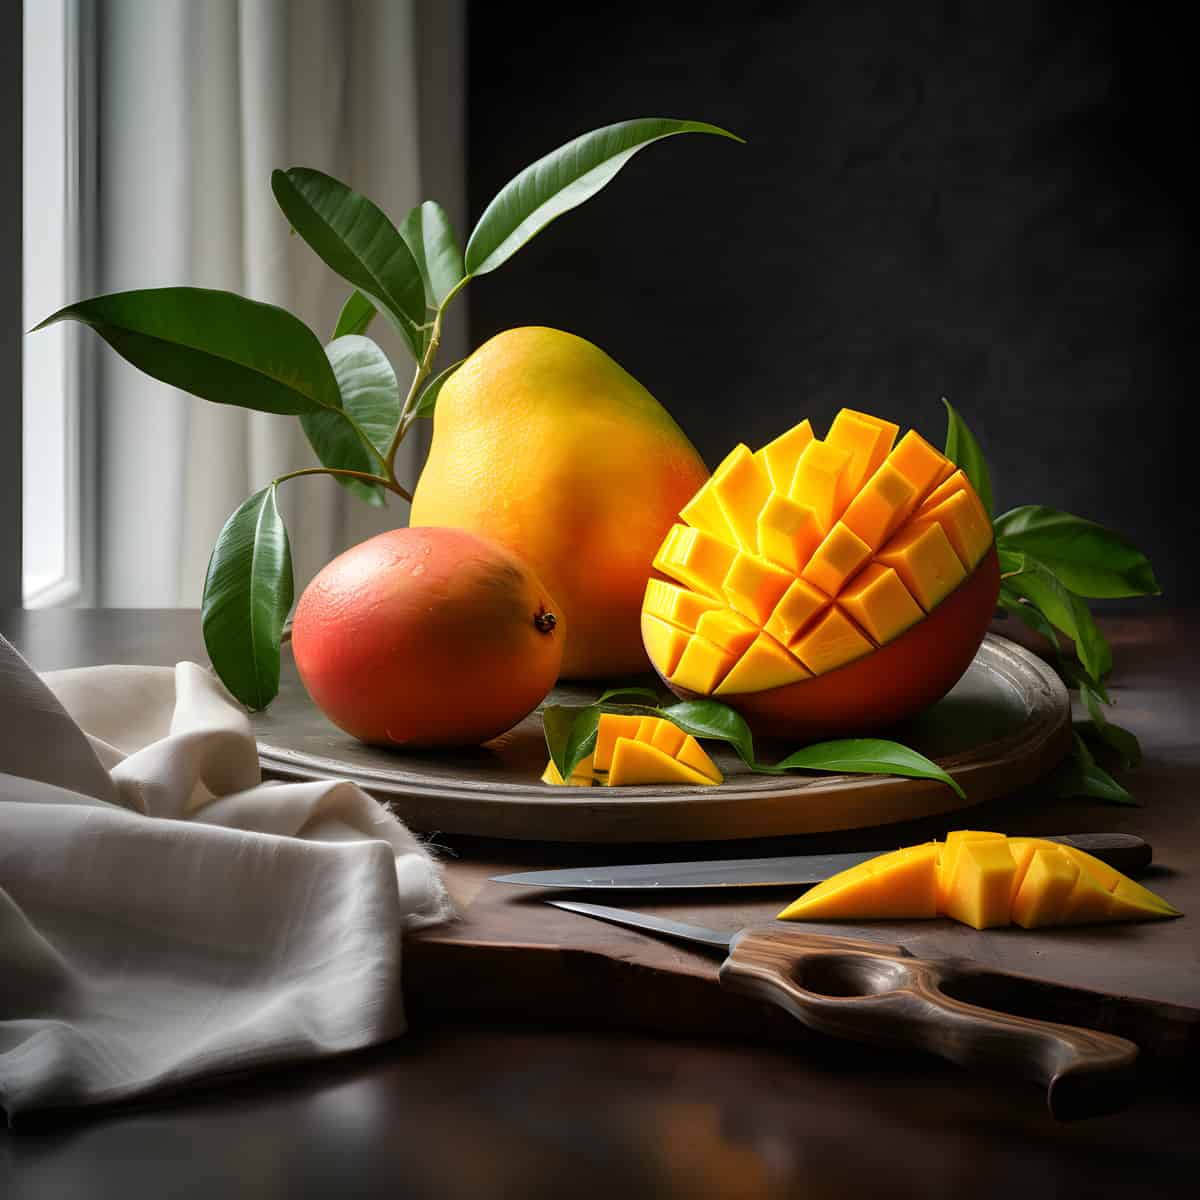 African Mango on a kitchen counter